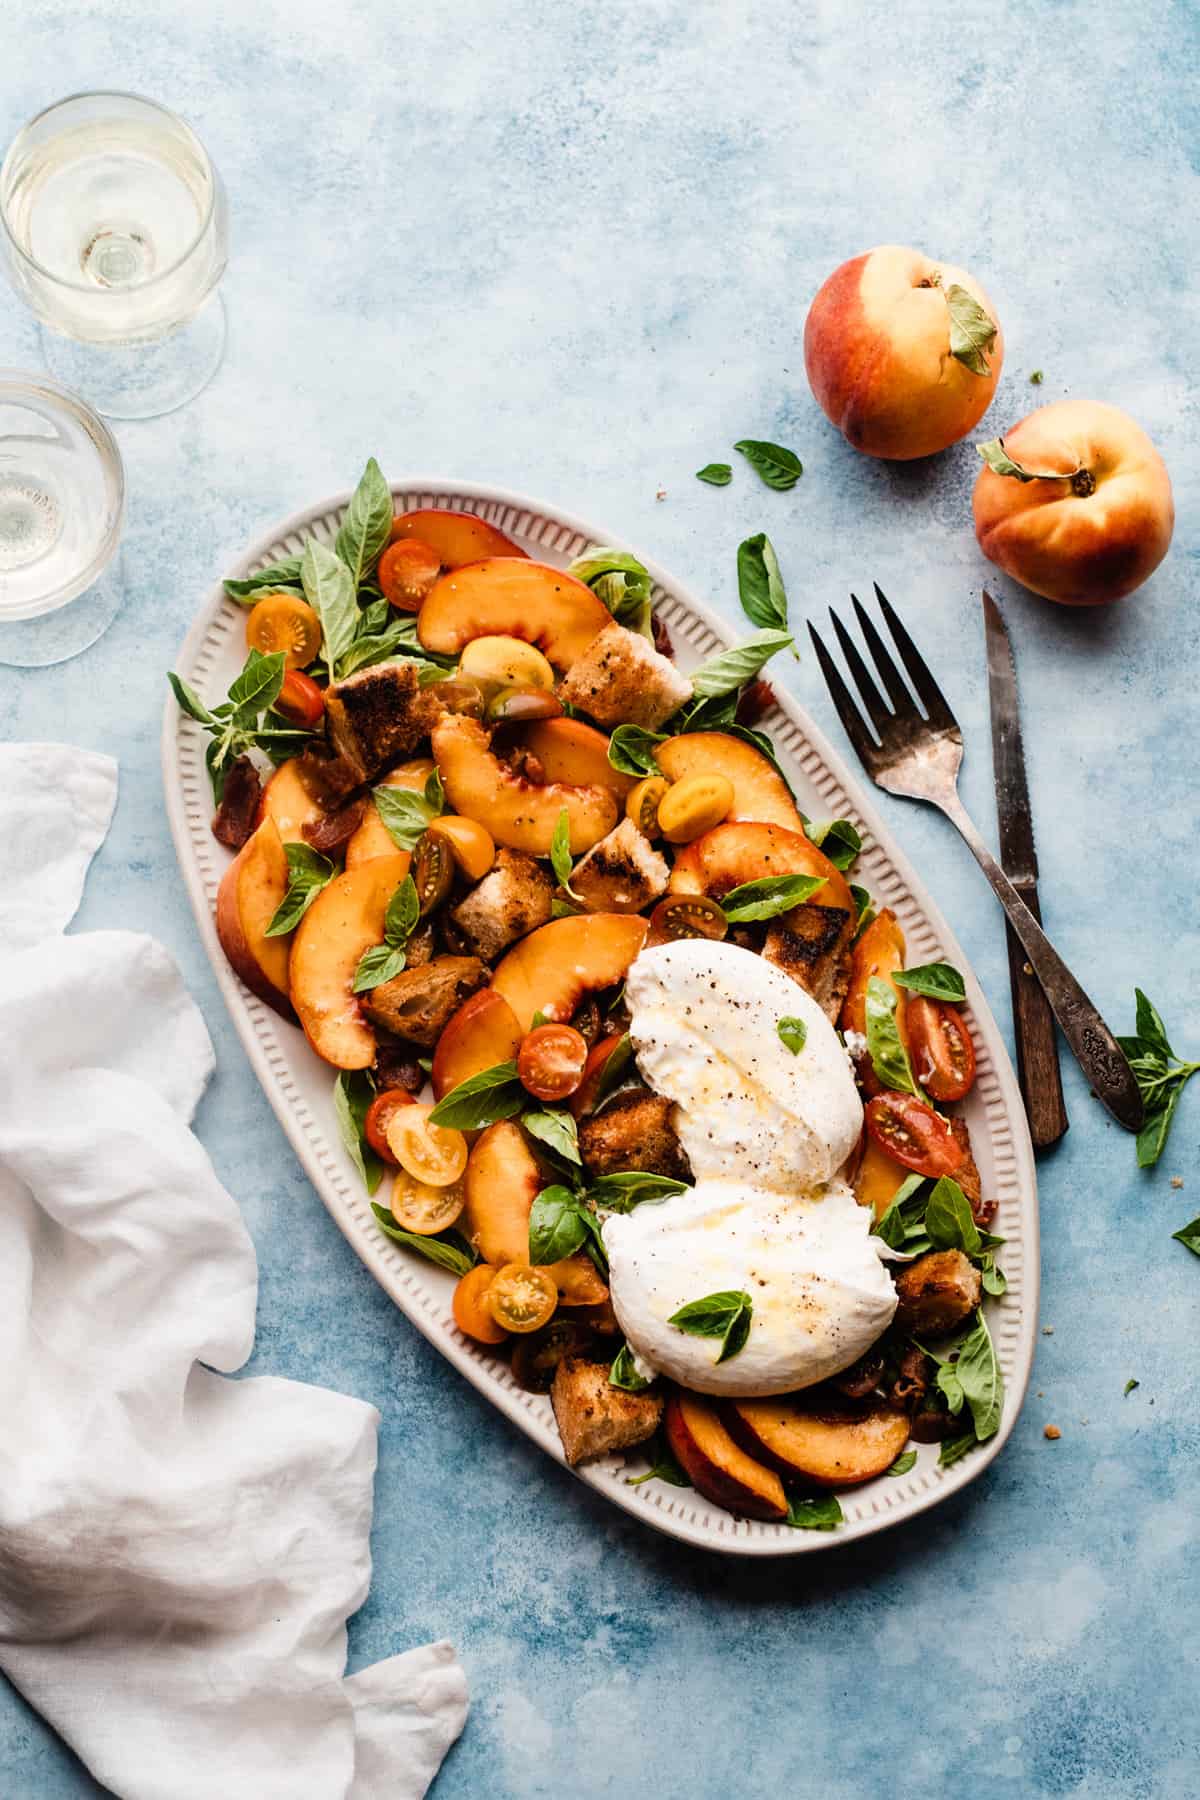 A peach salad with burrata, tomatoes, bacon, and basil on a platter.